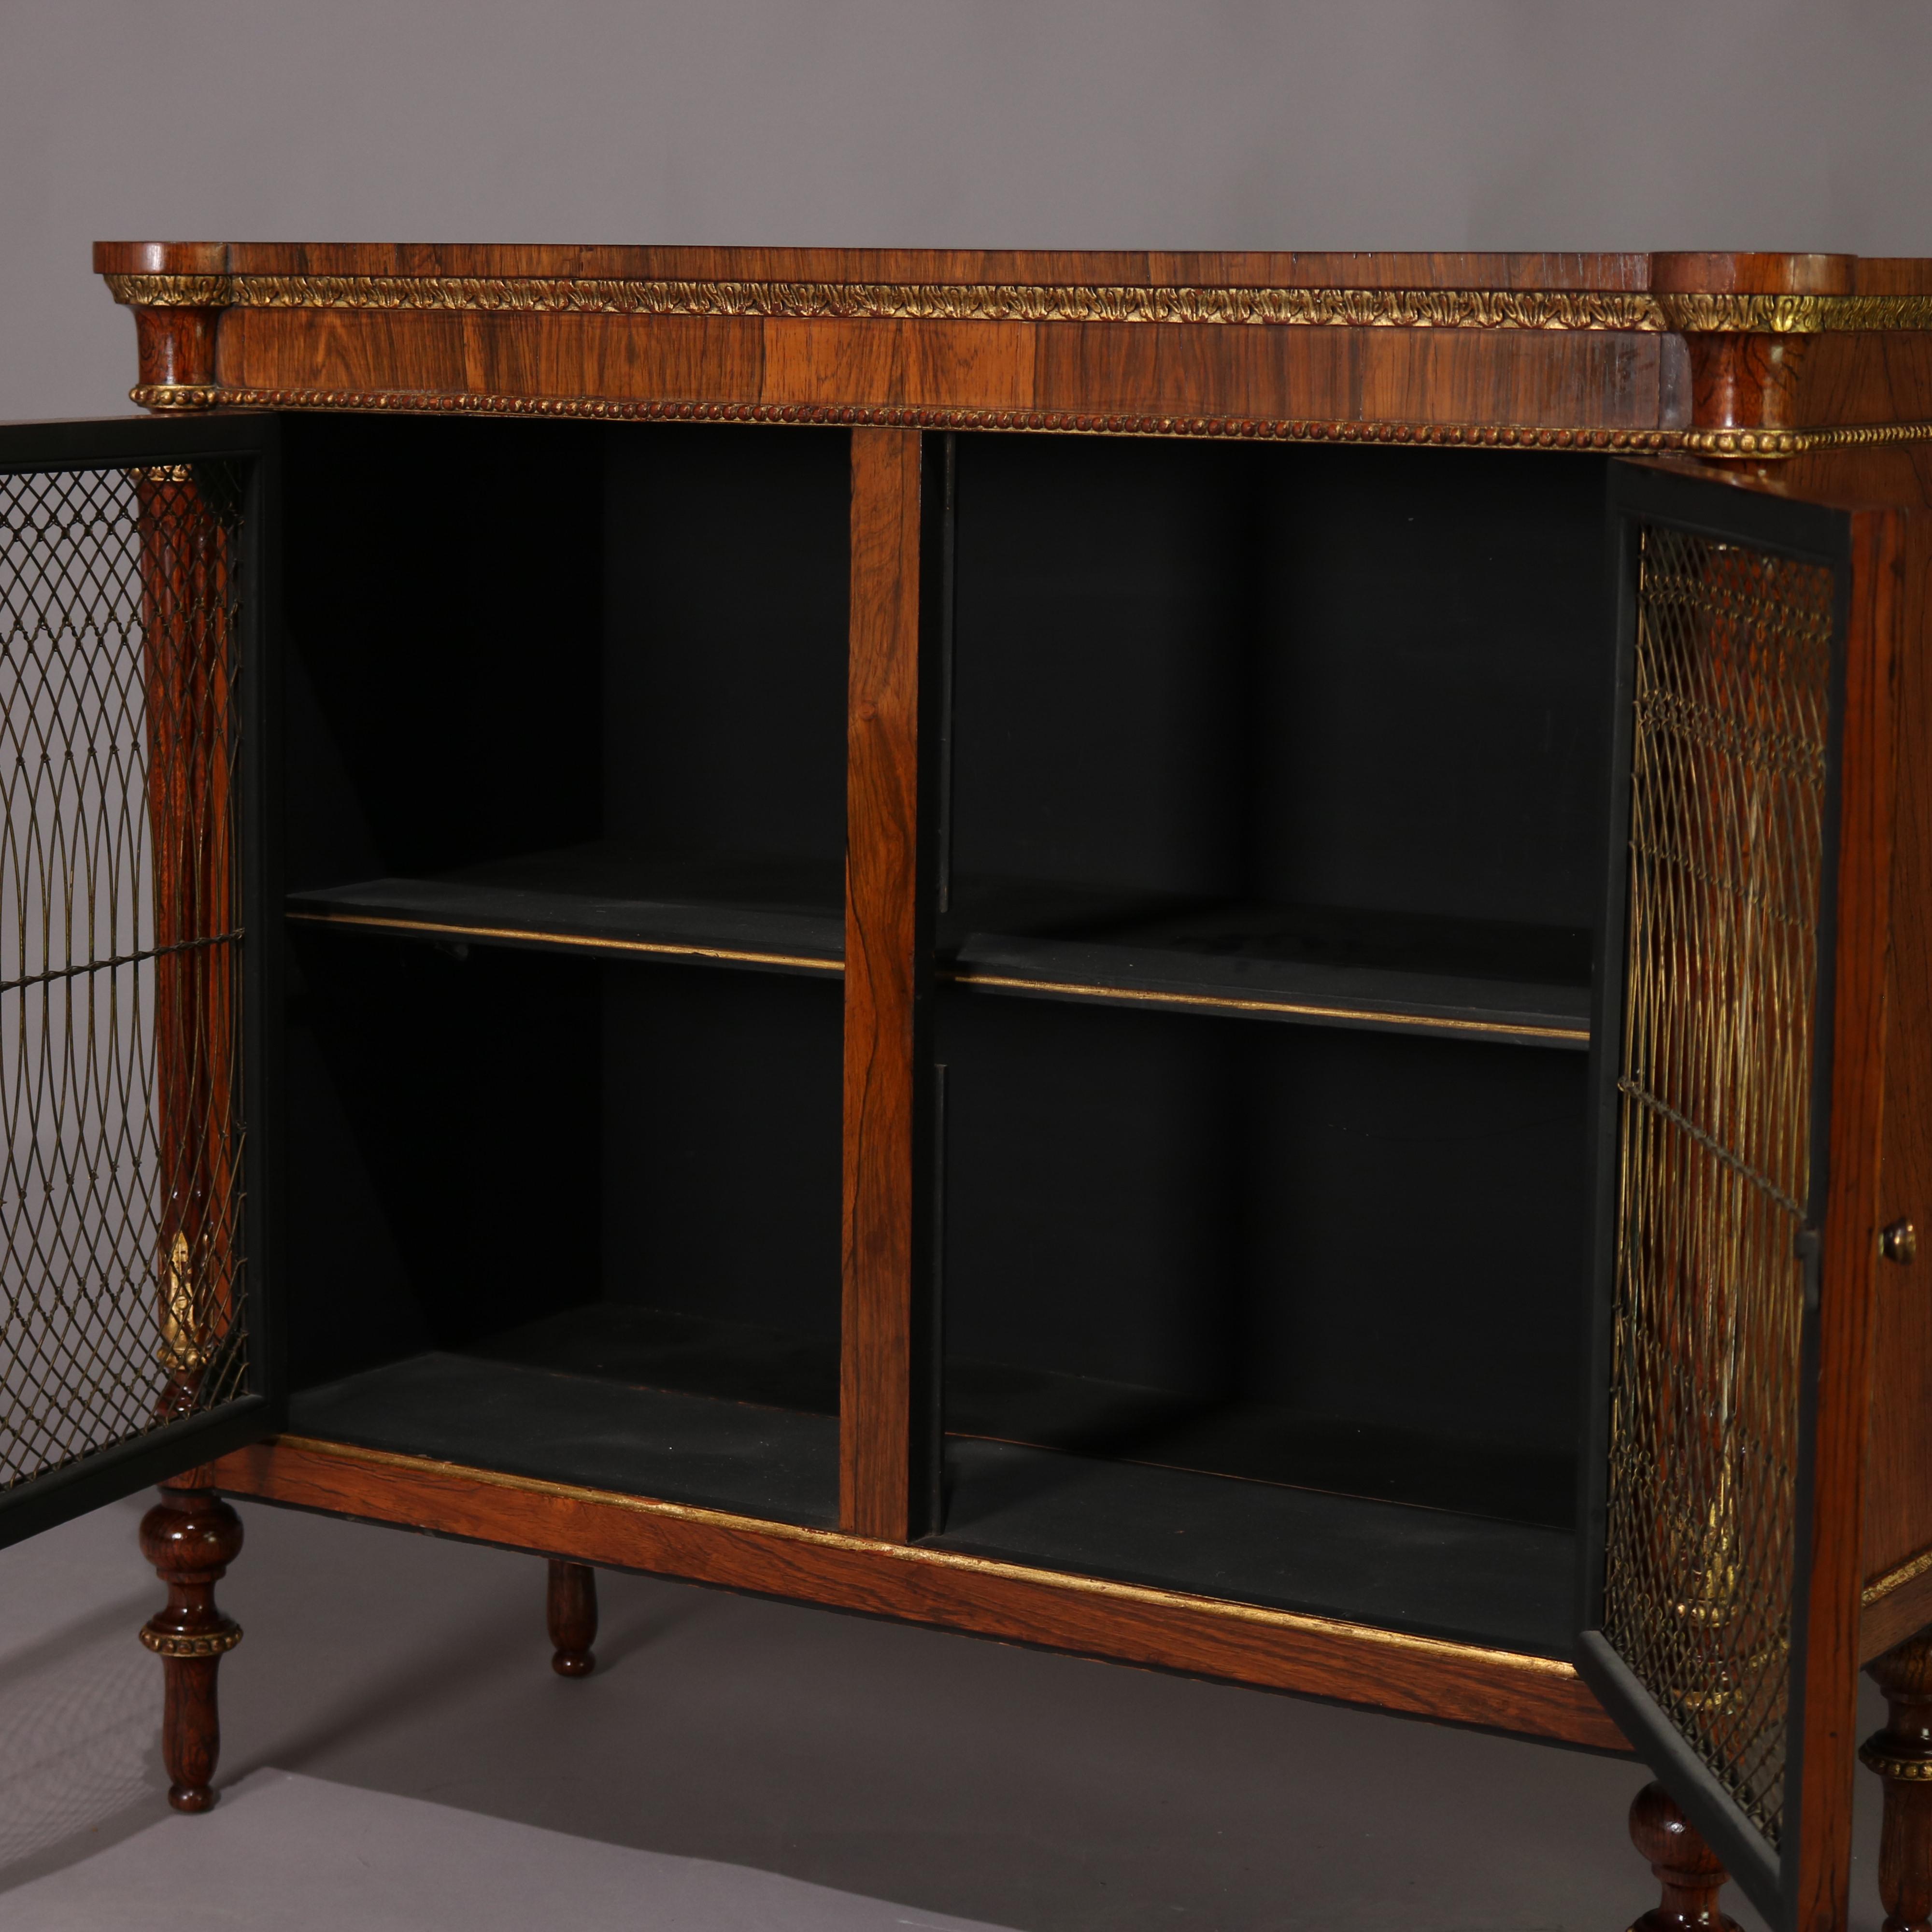 Regency Revival Antique English Regency Style Rosewood, Mesh and Gilt Two-Door Credenza